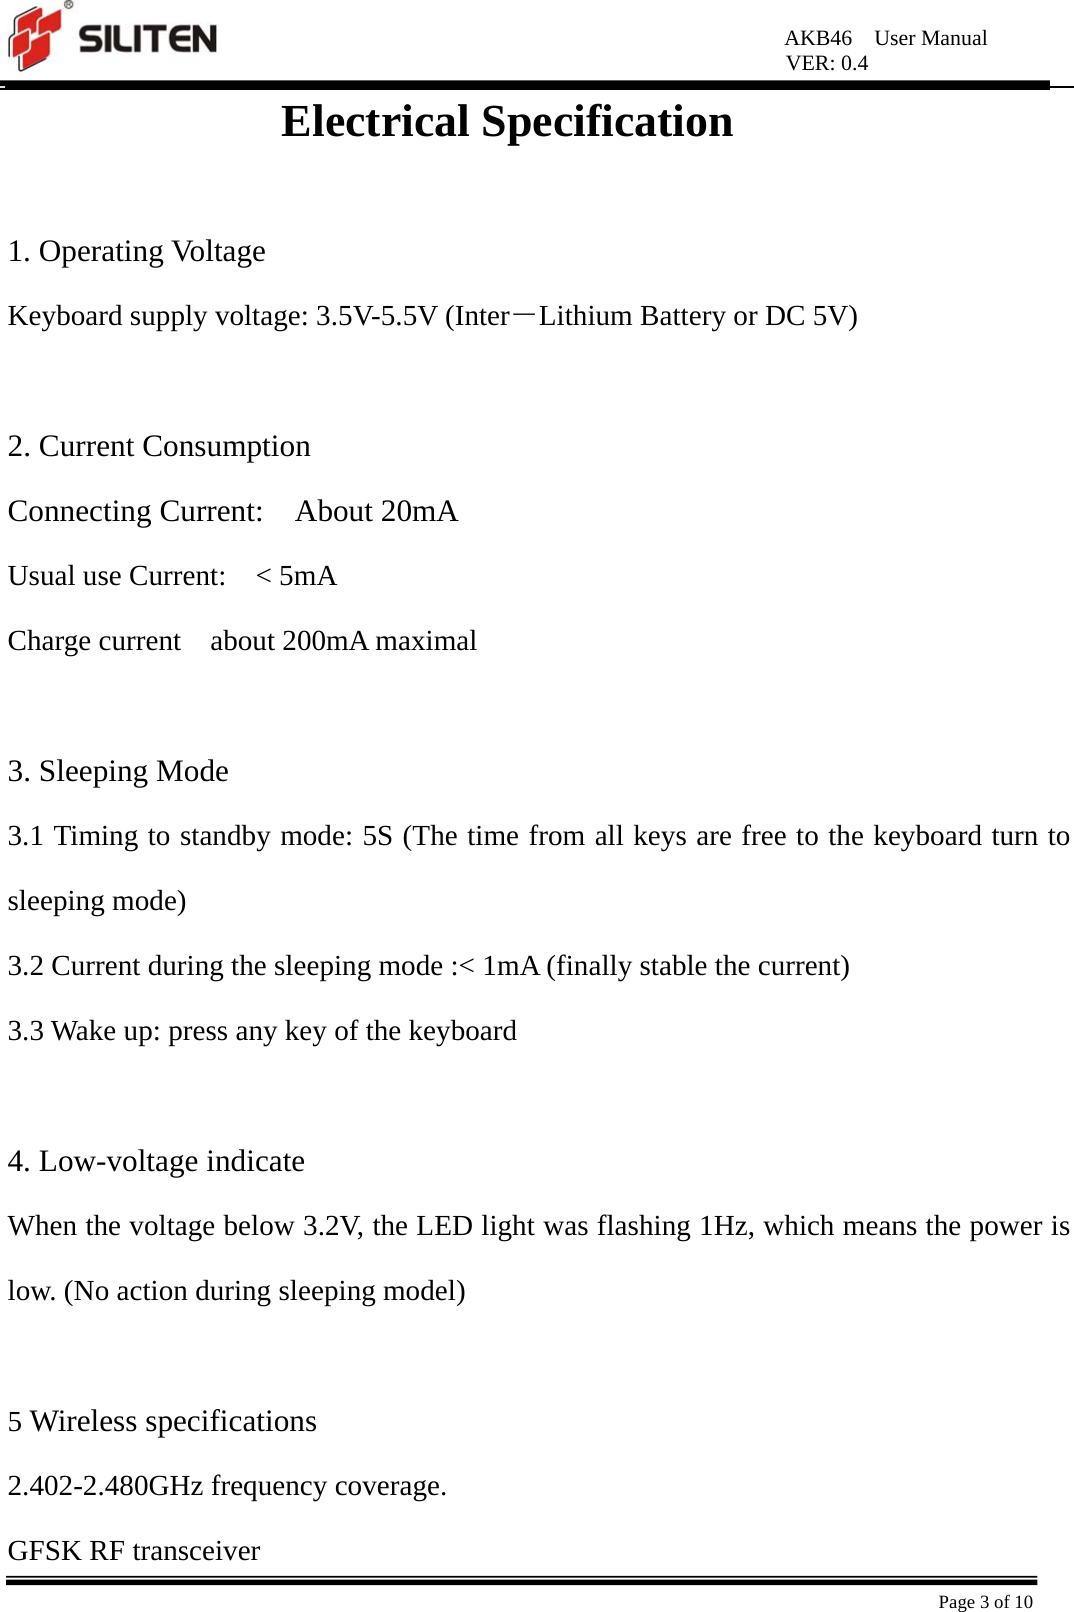 AKB46  User Manual VER: 0.4  Page 3 of 10 Electrical Specification  1. Operating Voltage Keyboard supply voltage: 3.5V-5.5V (Inter－Lithium Battery or DC 5V)  2. Current Consumption Connecting Current:  About 20mA Usual use Current:    &lt; 5mA Charge current  about 200mA maximal  3. Sleeping Mode 3.1 Timing to standby mode: 5S (The time from all keys are free to the keyboard turn to sleeping mode) 3.2 Current during the sleeping mode :&lt; 1mA (finally stable the current) 3.3 Wake up: press any key of the keyboard  4. Low-voltage indicate When the voltage below 3.2V, the LED light was flashing 1Hz, which means the power is low. (No action during sleeping model)  5 Wireless specifications 2.402-2.480GHz frequency coverage. GFSK RF transceiver 